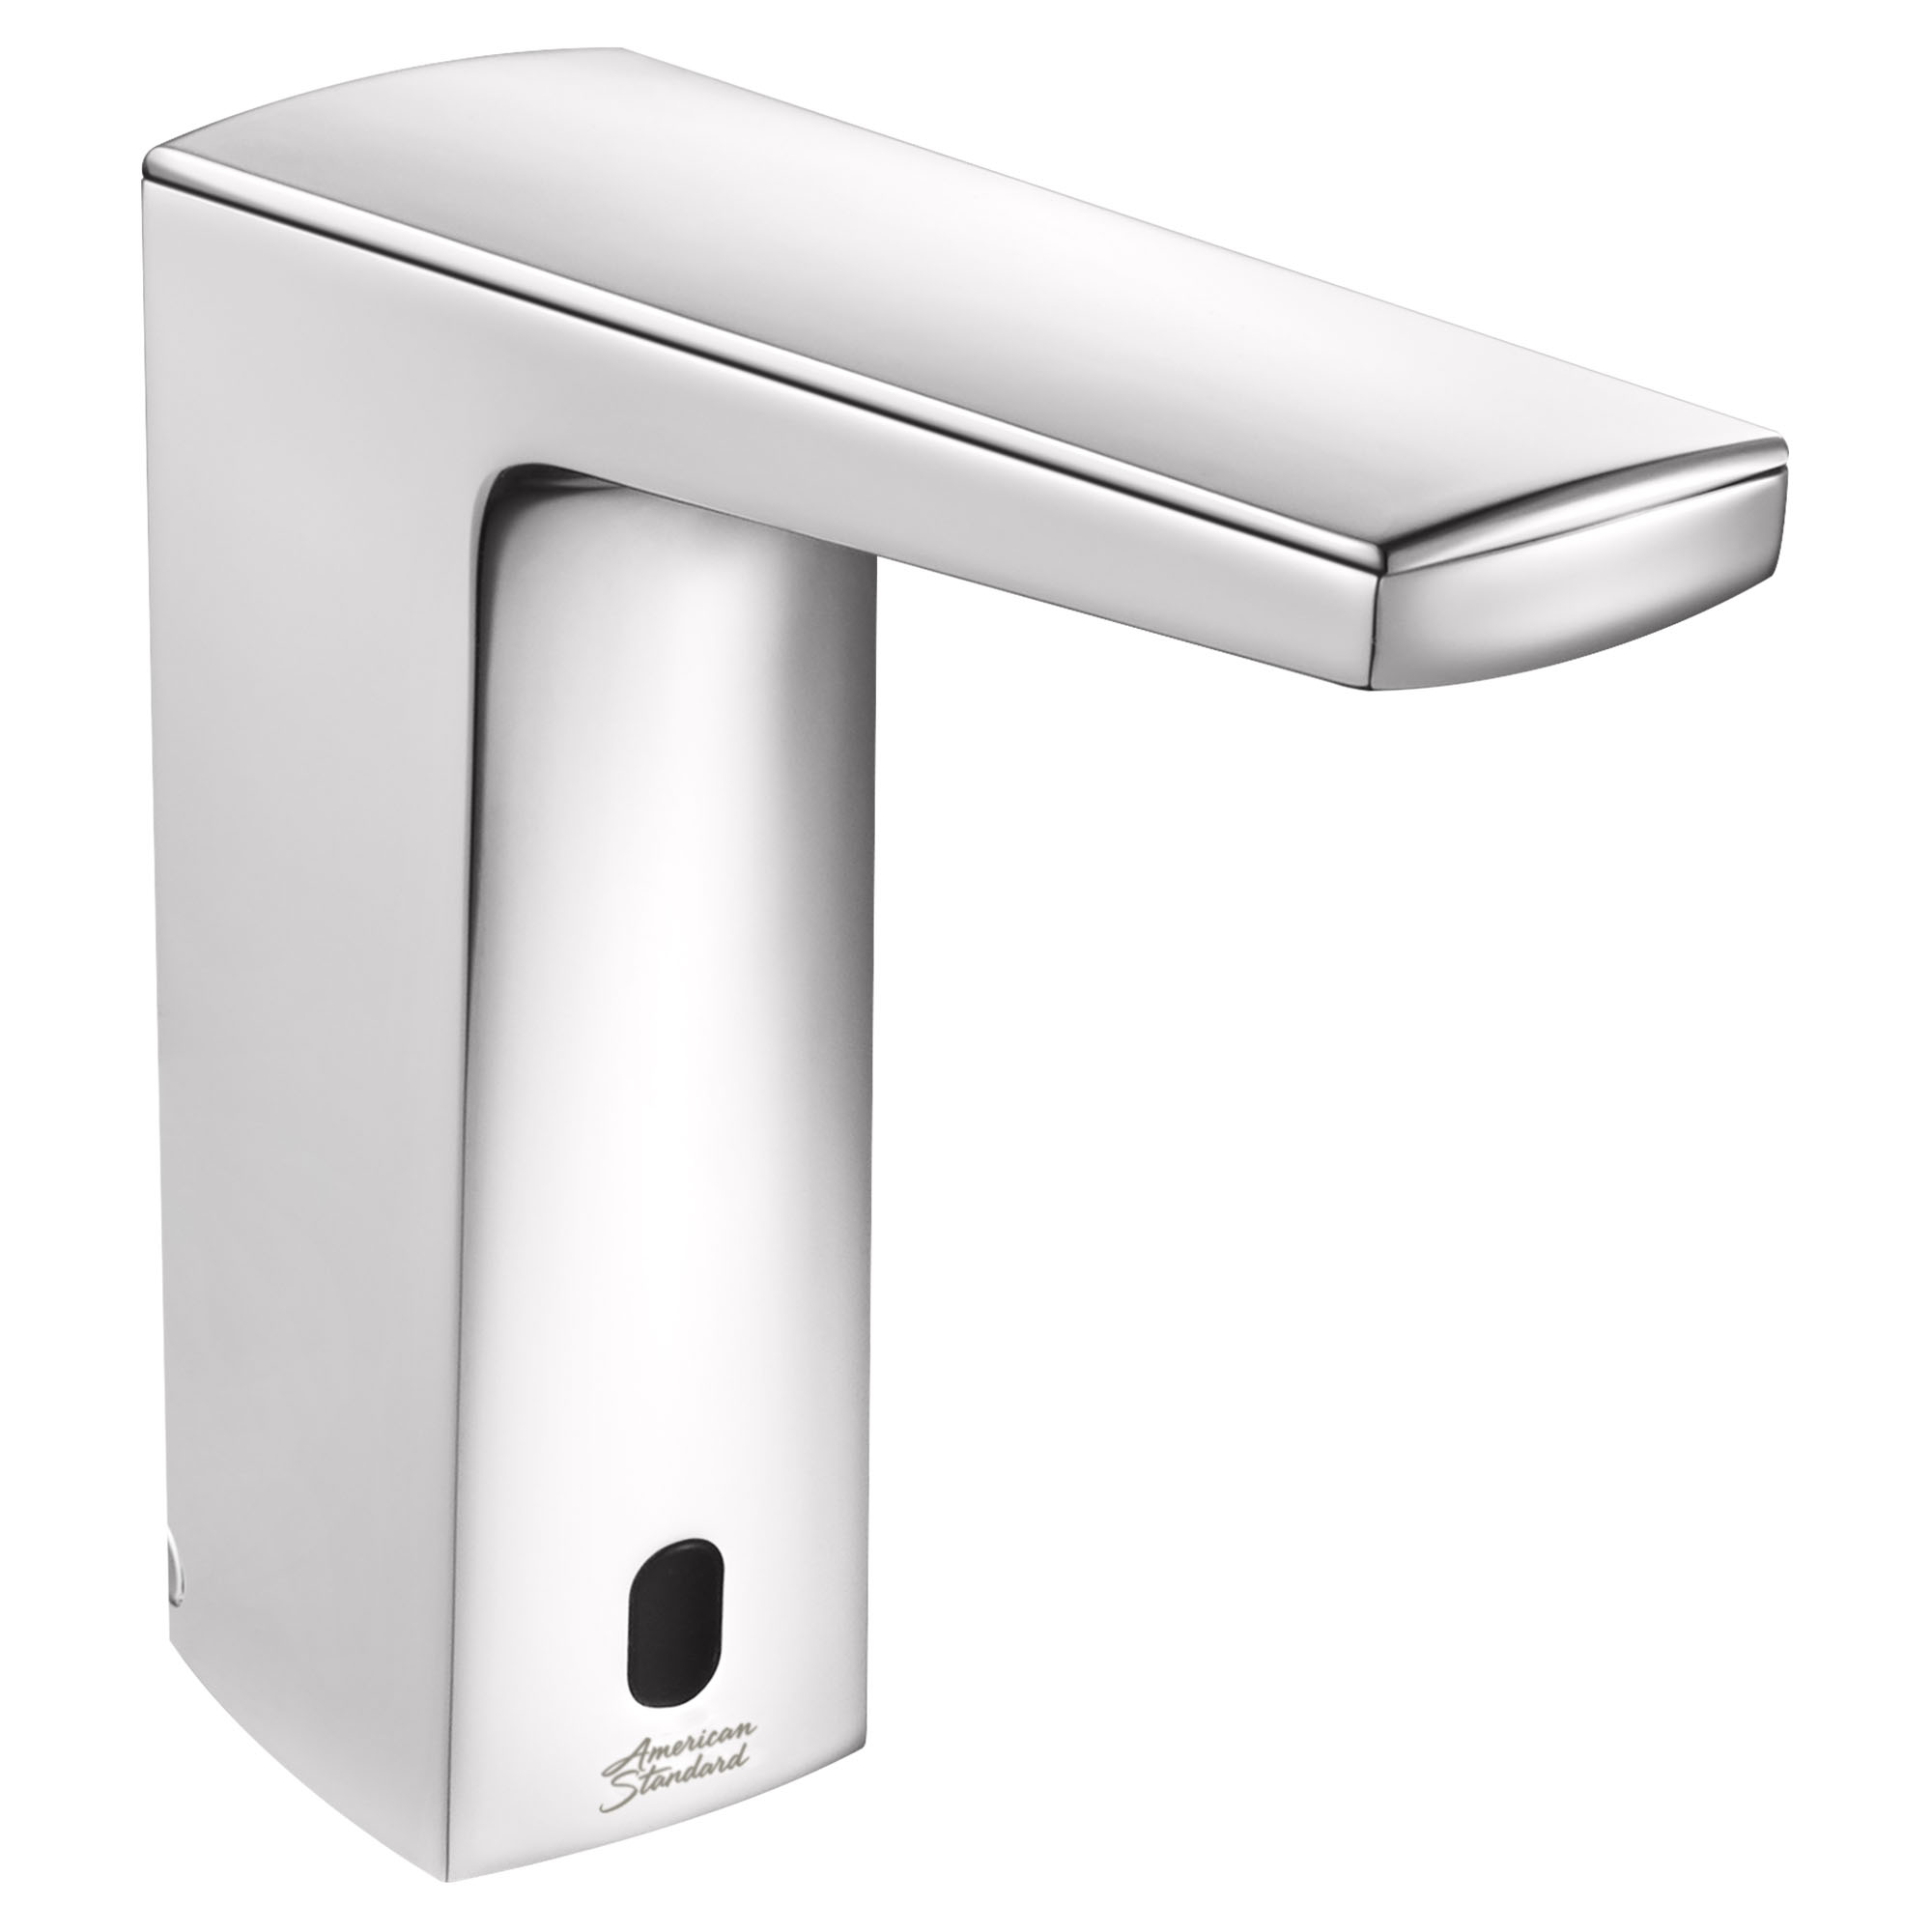 Paradigm™ Selectronic™ Touchless Faucet, Battery-Powered With SmarTherm Safety Shut-Off + ADM, 0.35 gpm/1.3 Lpm